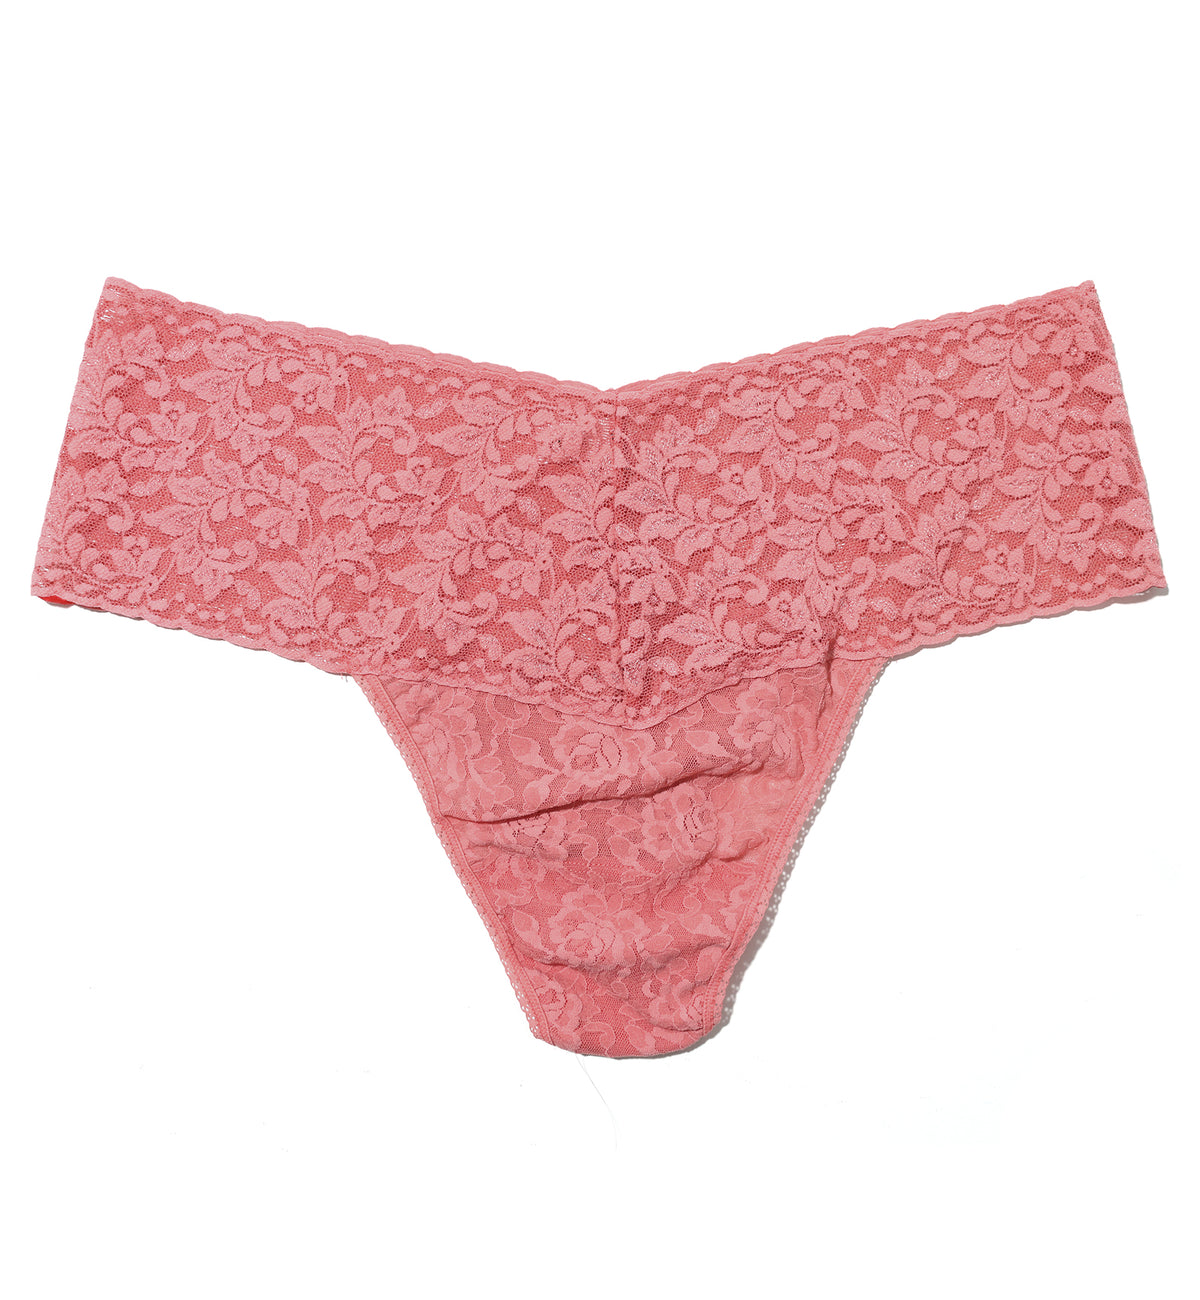 Hanky Panky Retro Lace Thong (9K1926P),Guava Pink - Guava Pink,One Size